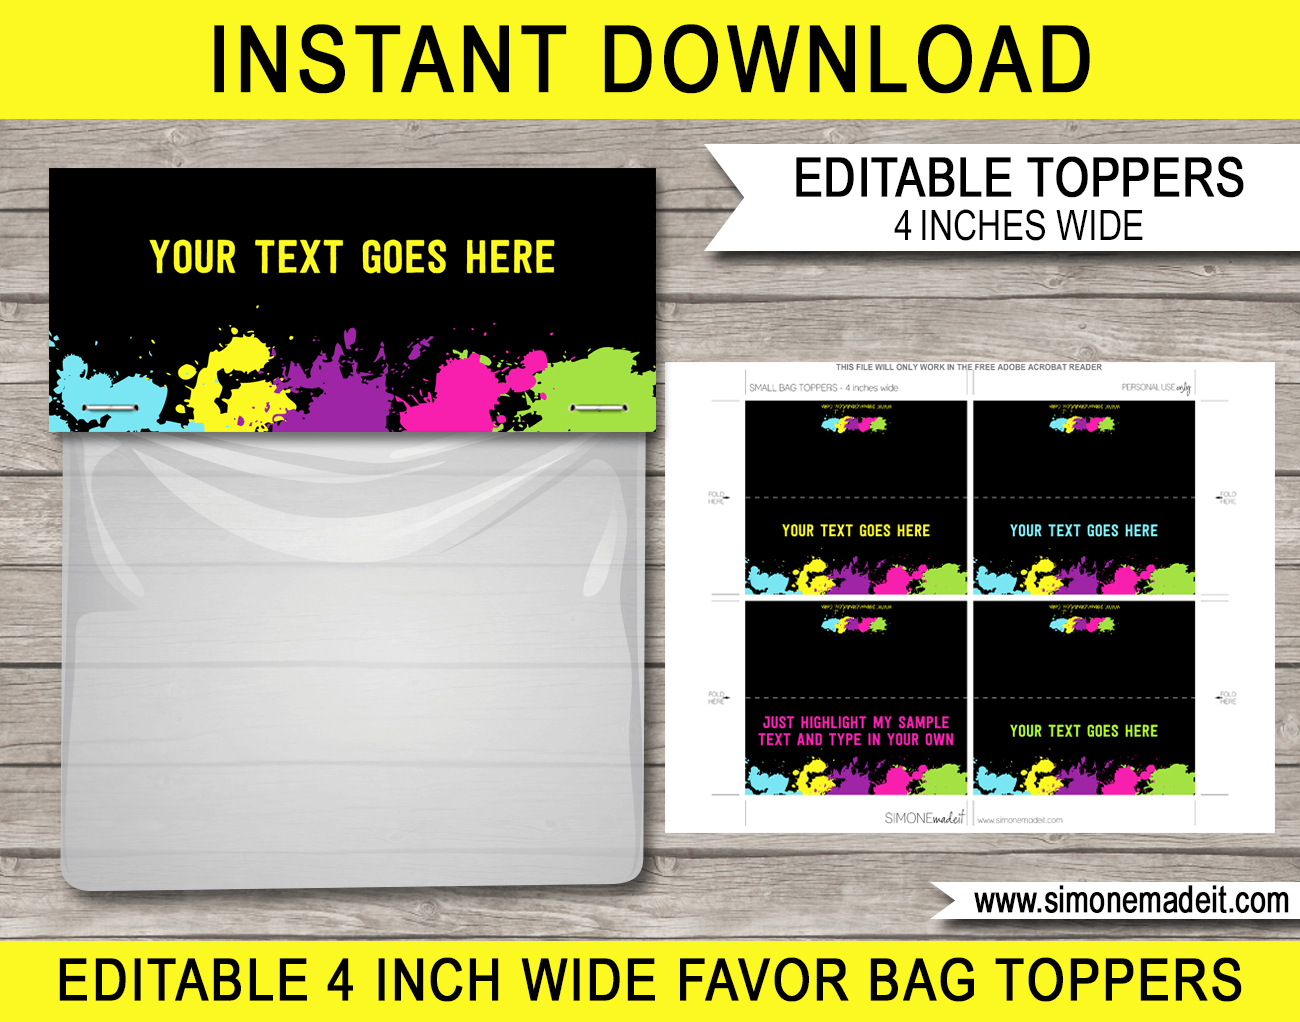 Neon Glow Party Favor Bag Toppers | Neon Glow Theme Birthday Party | Editable DIY Template | $3.00 INSTANT DOWNLOAD via SIMONEmadeit.com